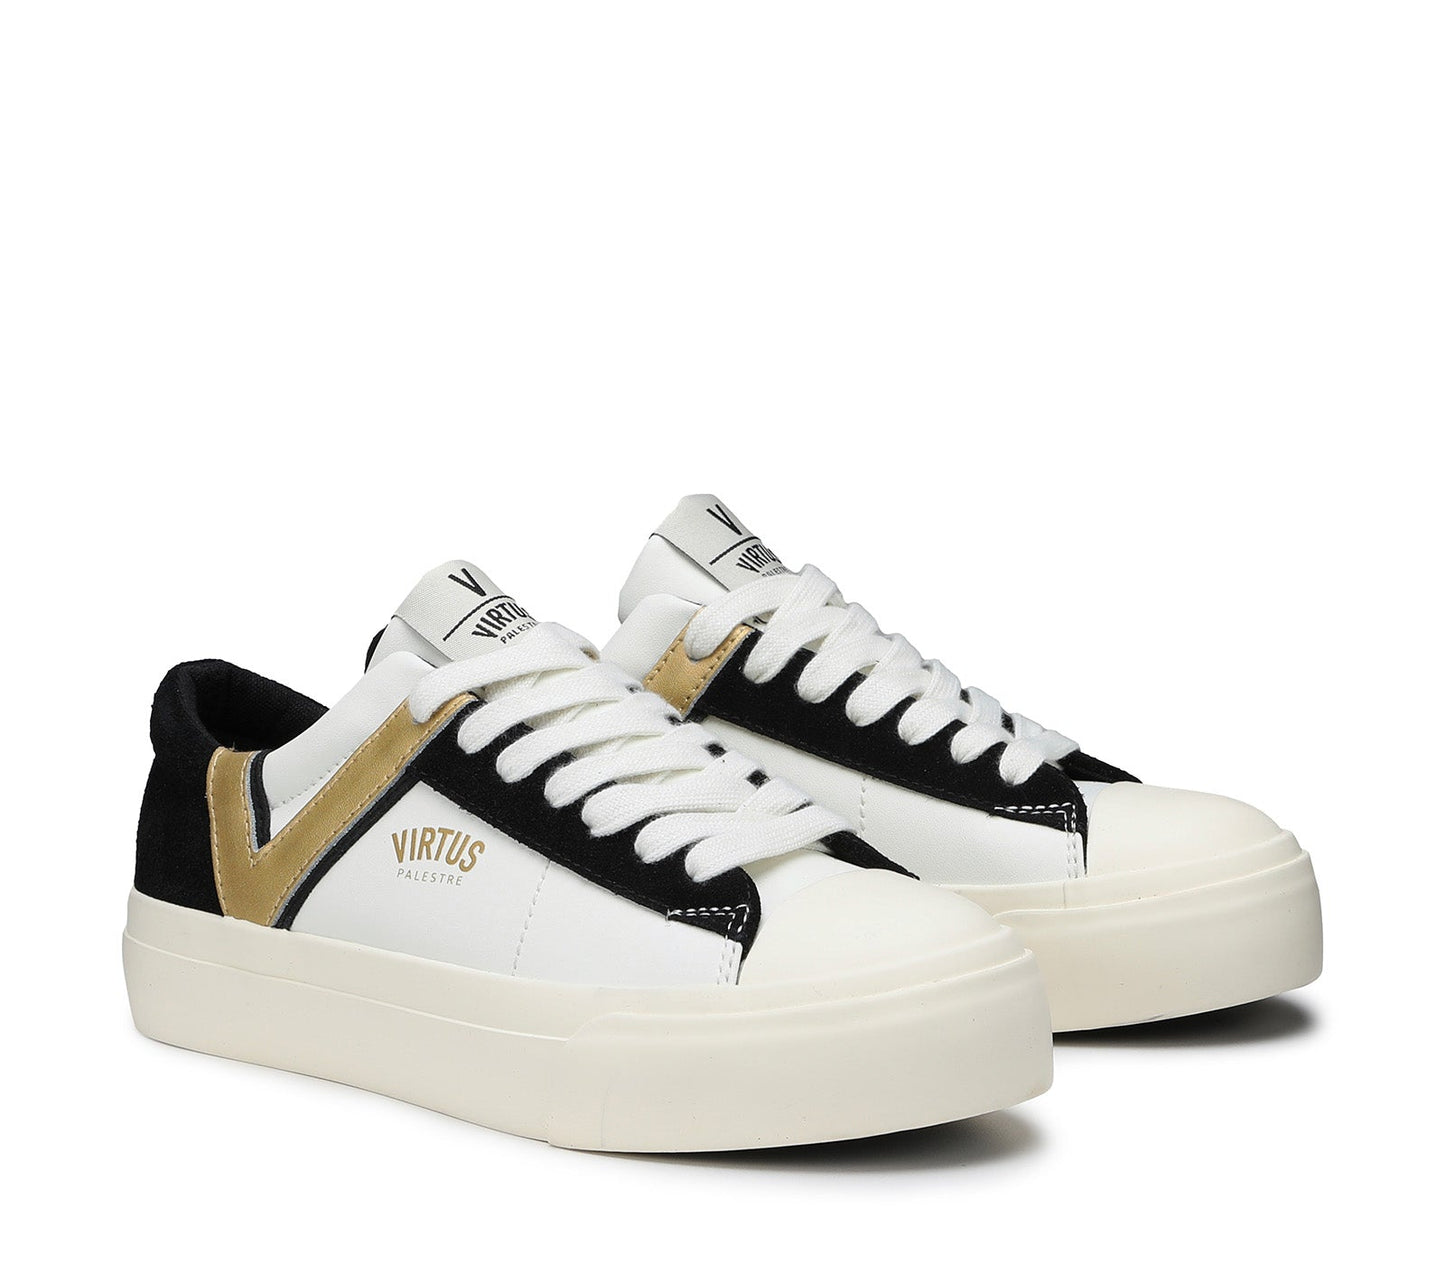 Rubby Low Leather/suede off white/black-gold